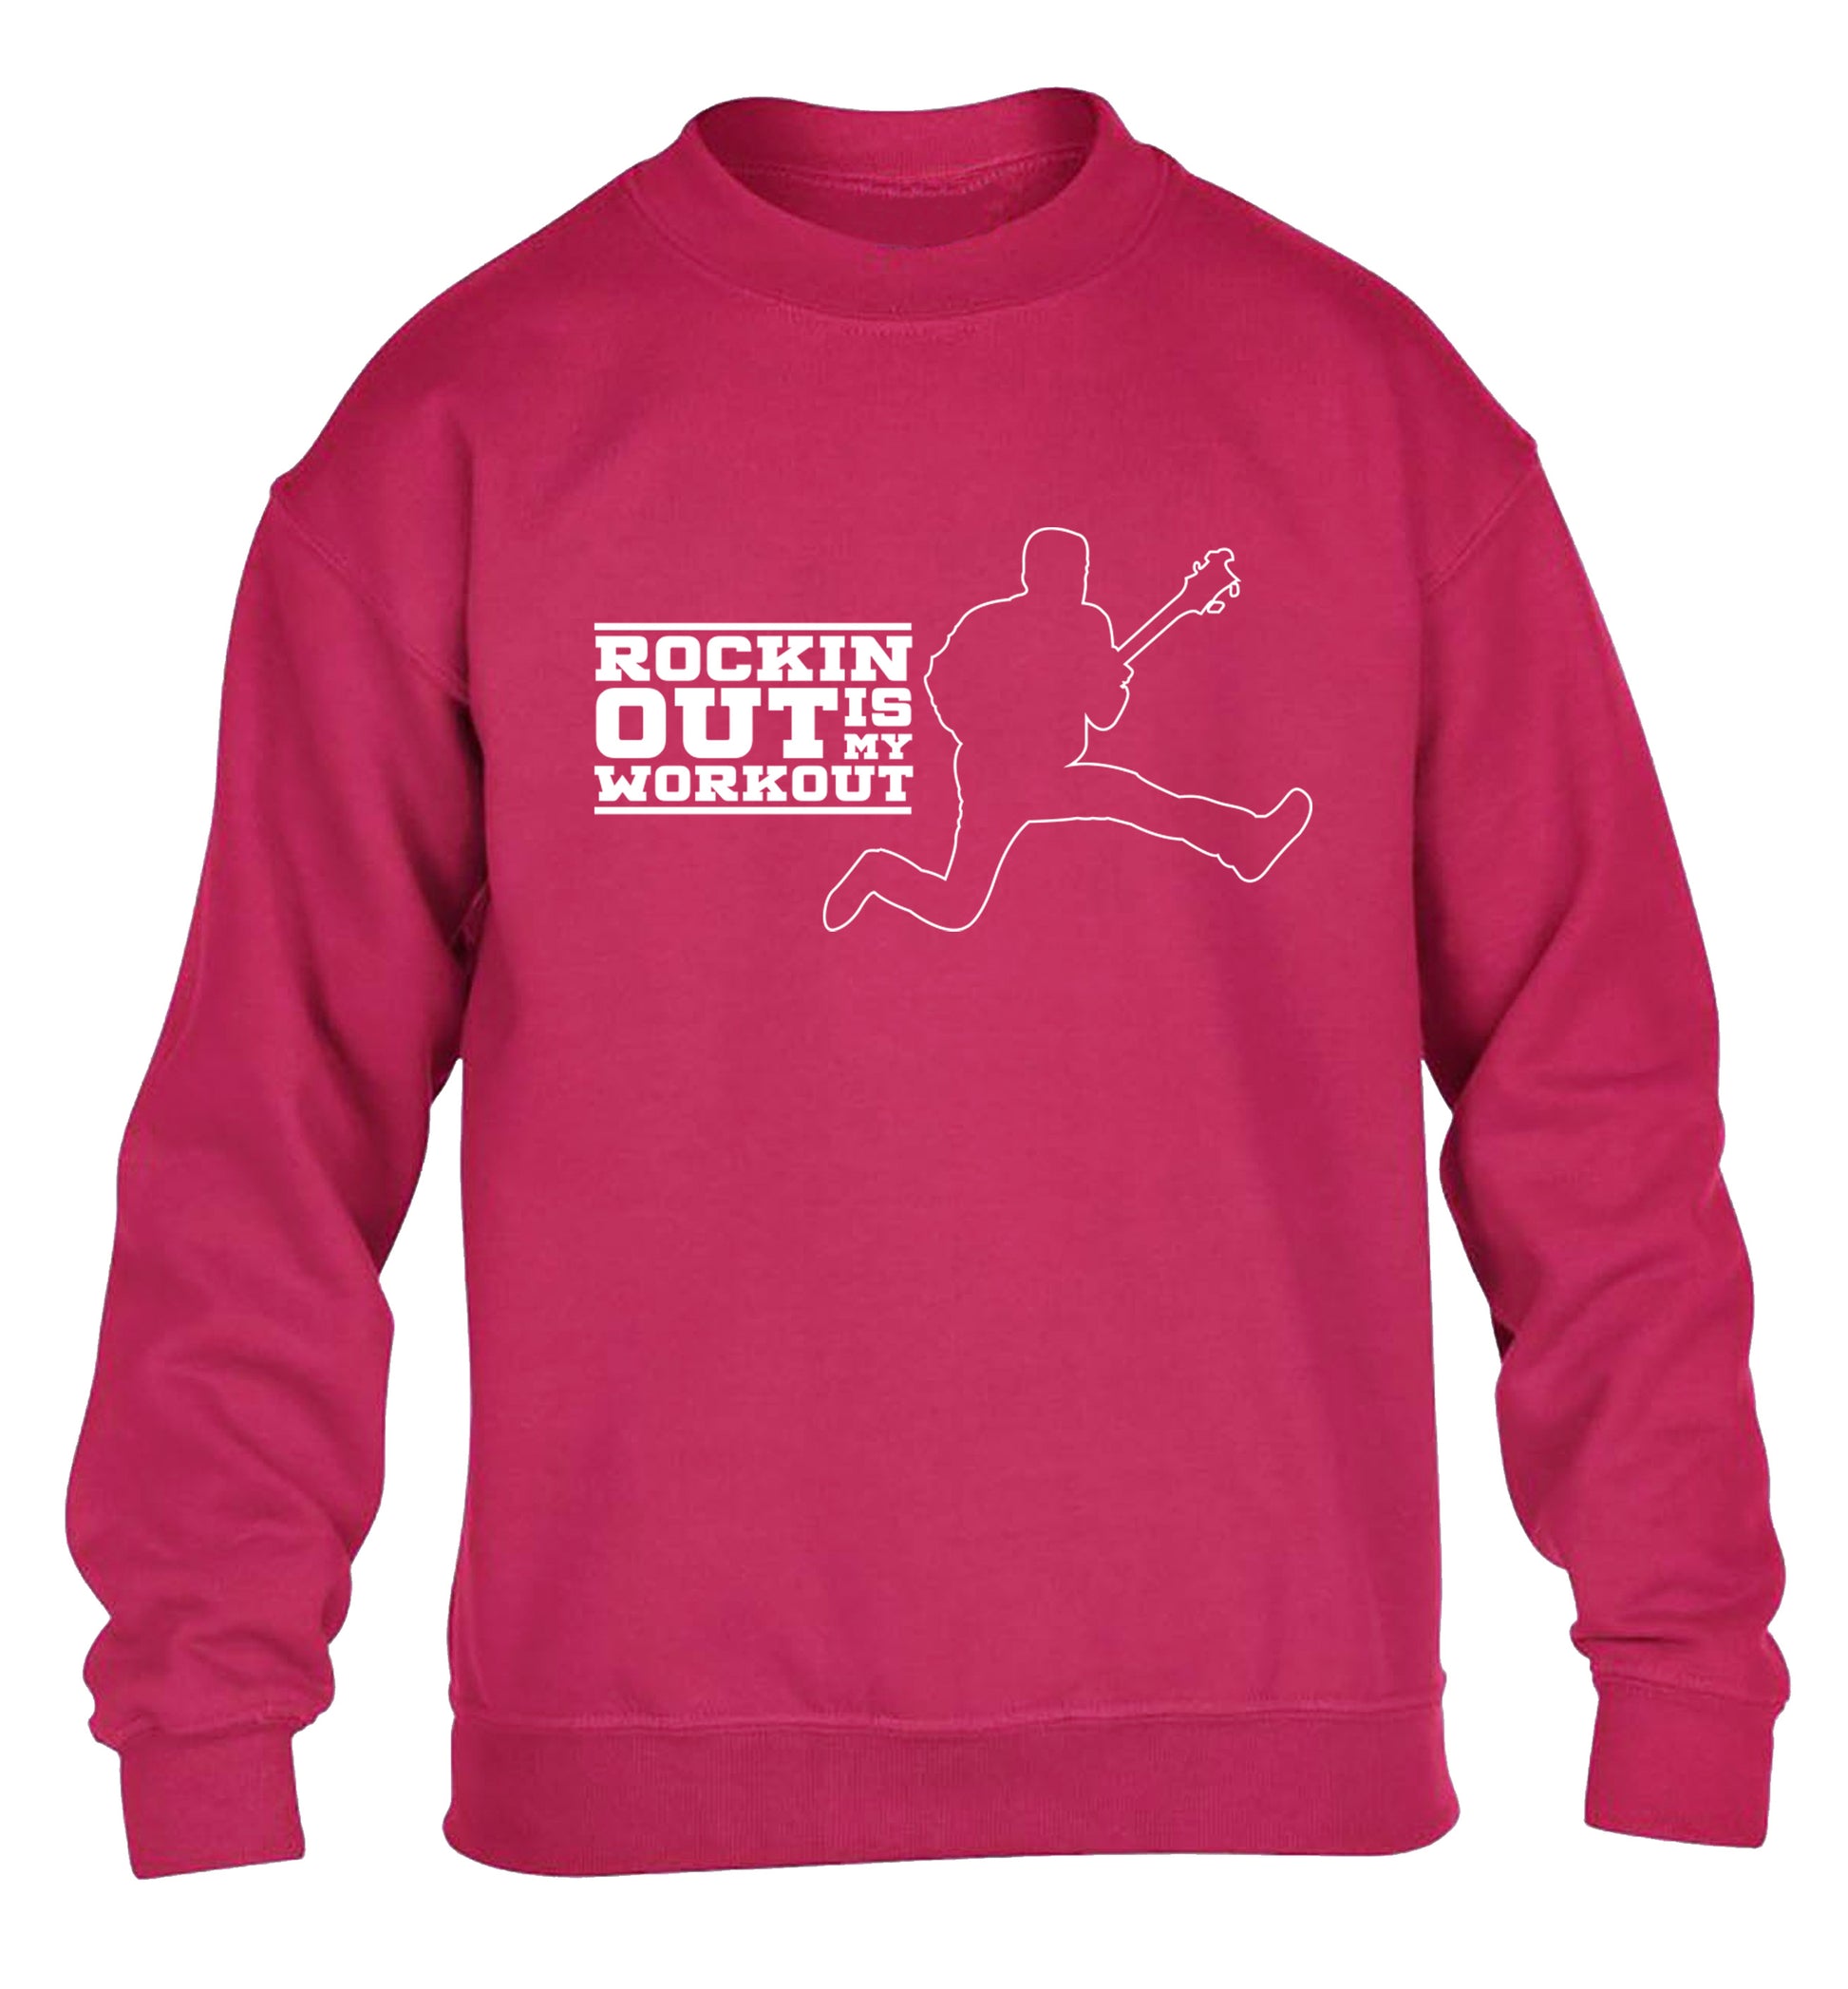 Rockin out is my workout children's pink sweater 12-13 Years